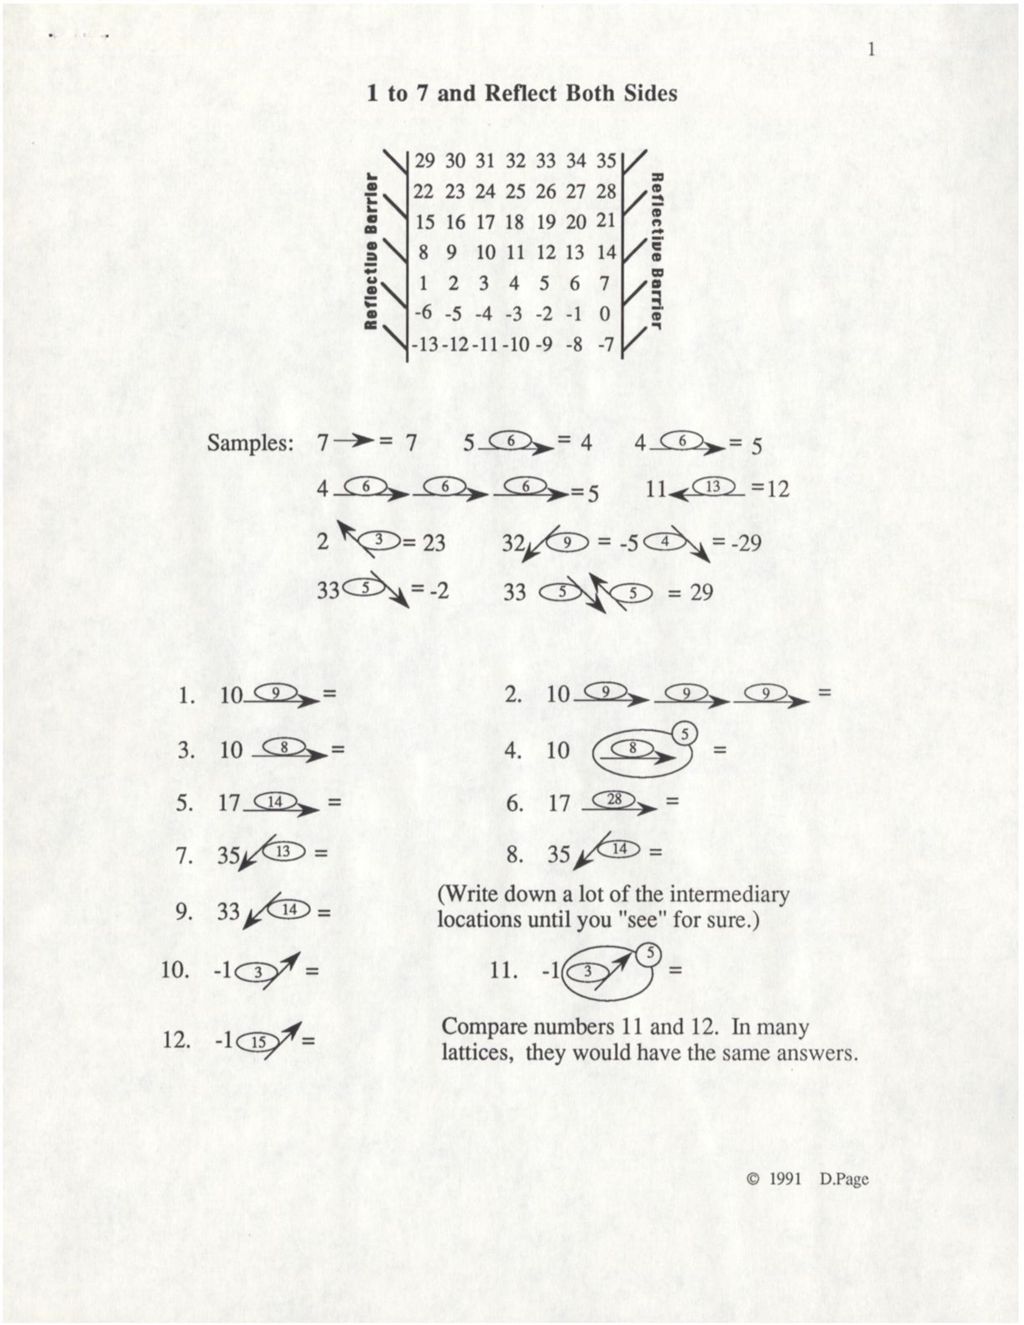 Miniature of 1 to 7 and Reflect Both Sides (7 lattice, examples, problems, Answer Key) (1991)